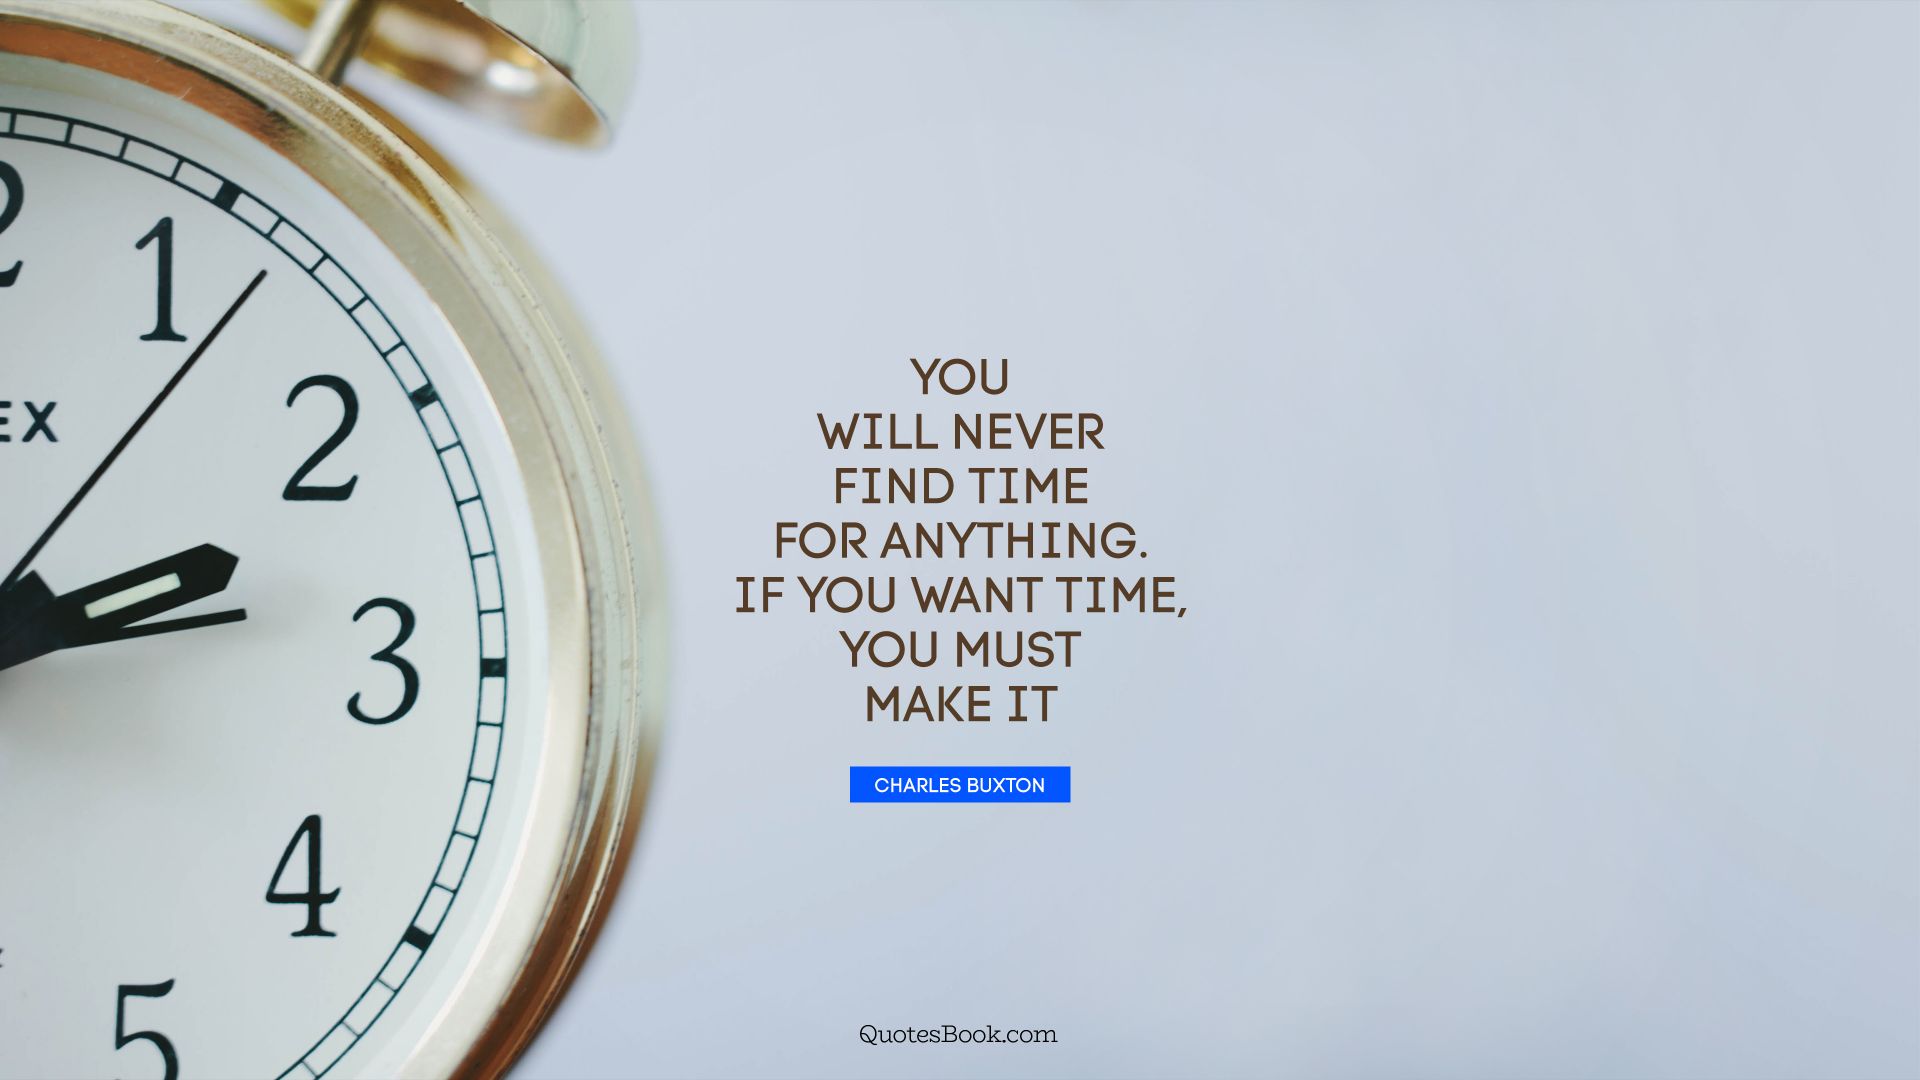 You will never find time for anything. If you want time, you must make it. - Quote by Charles Buxton